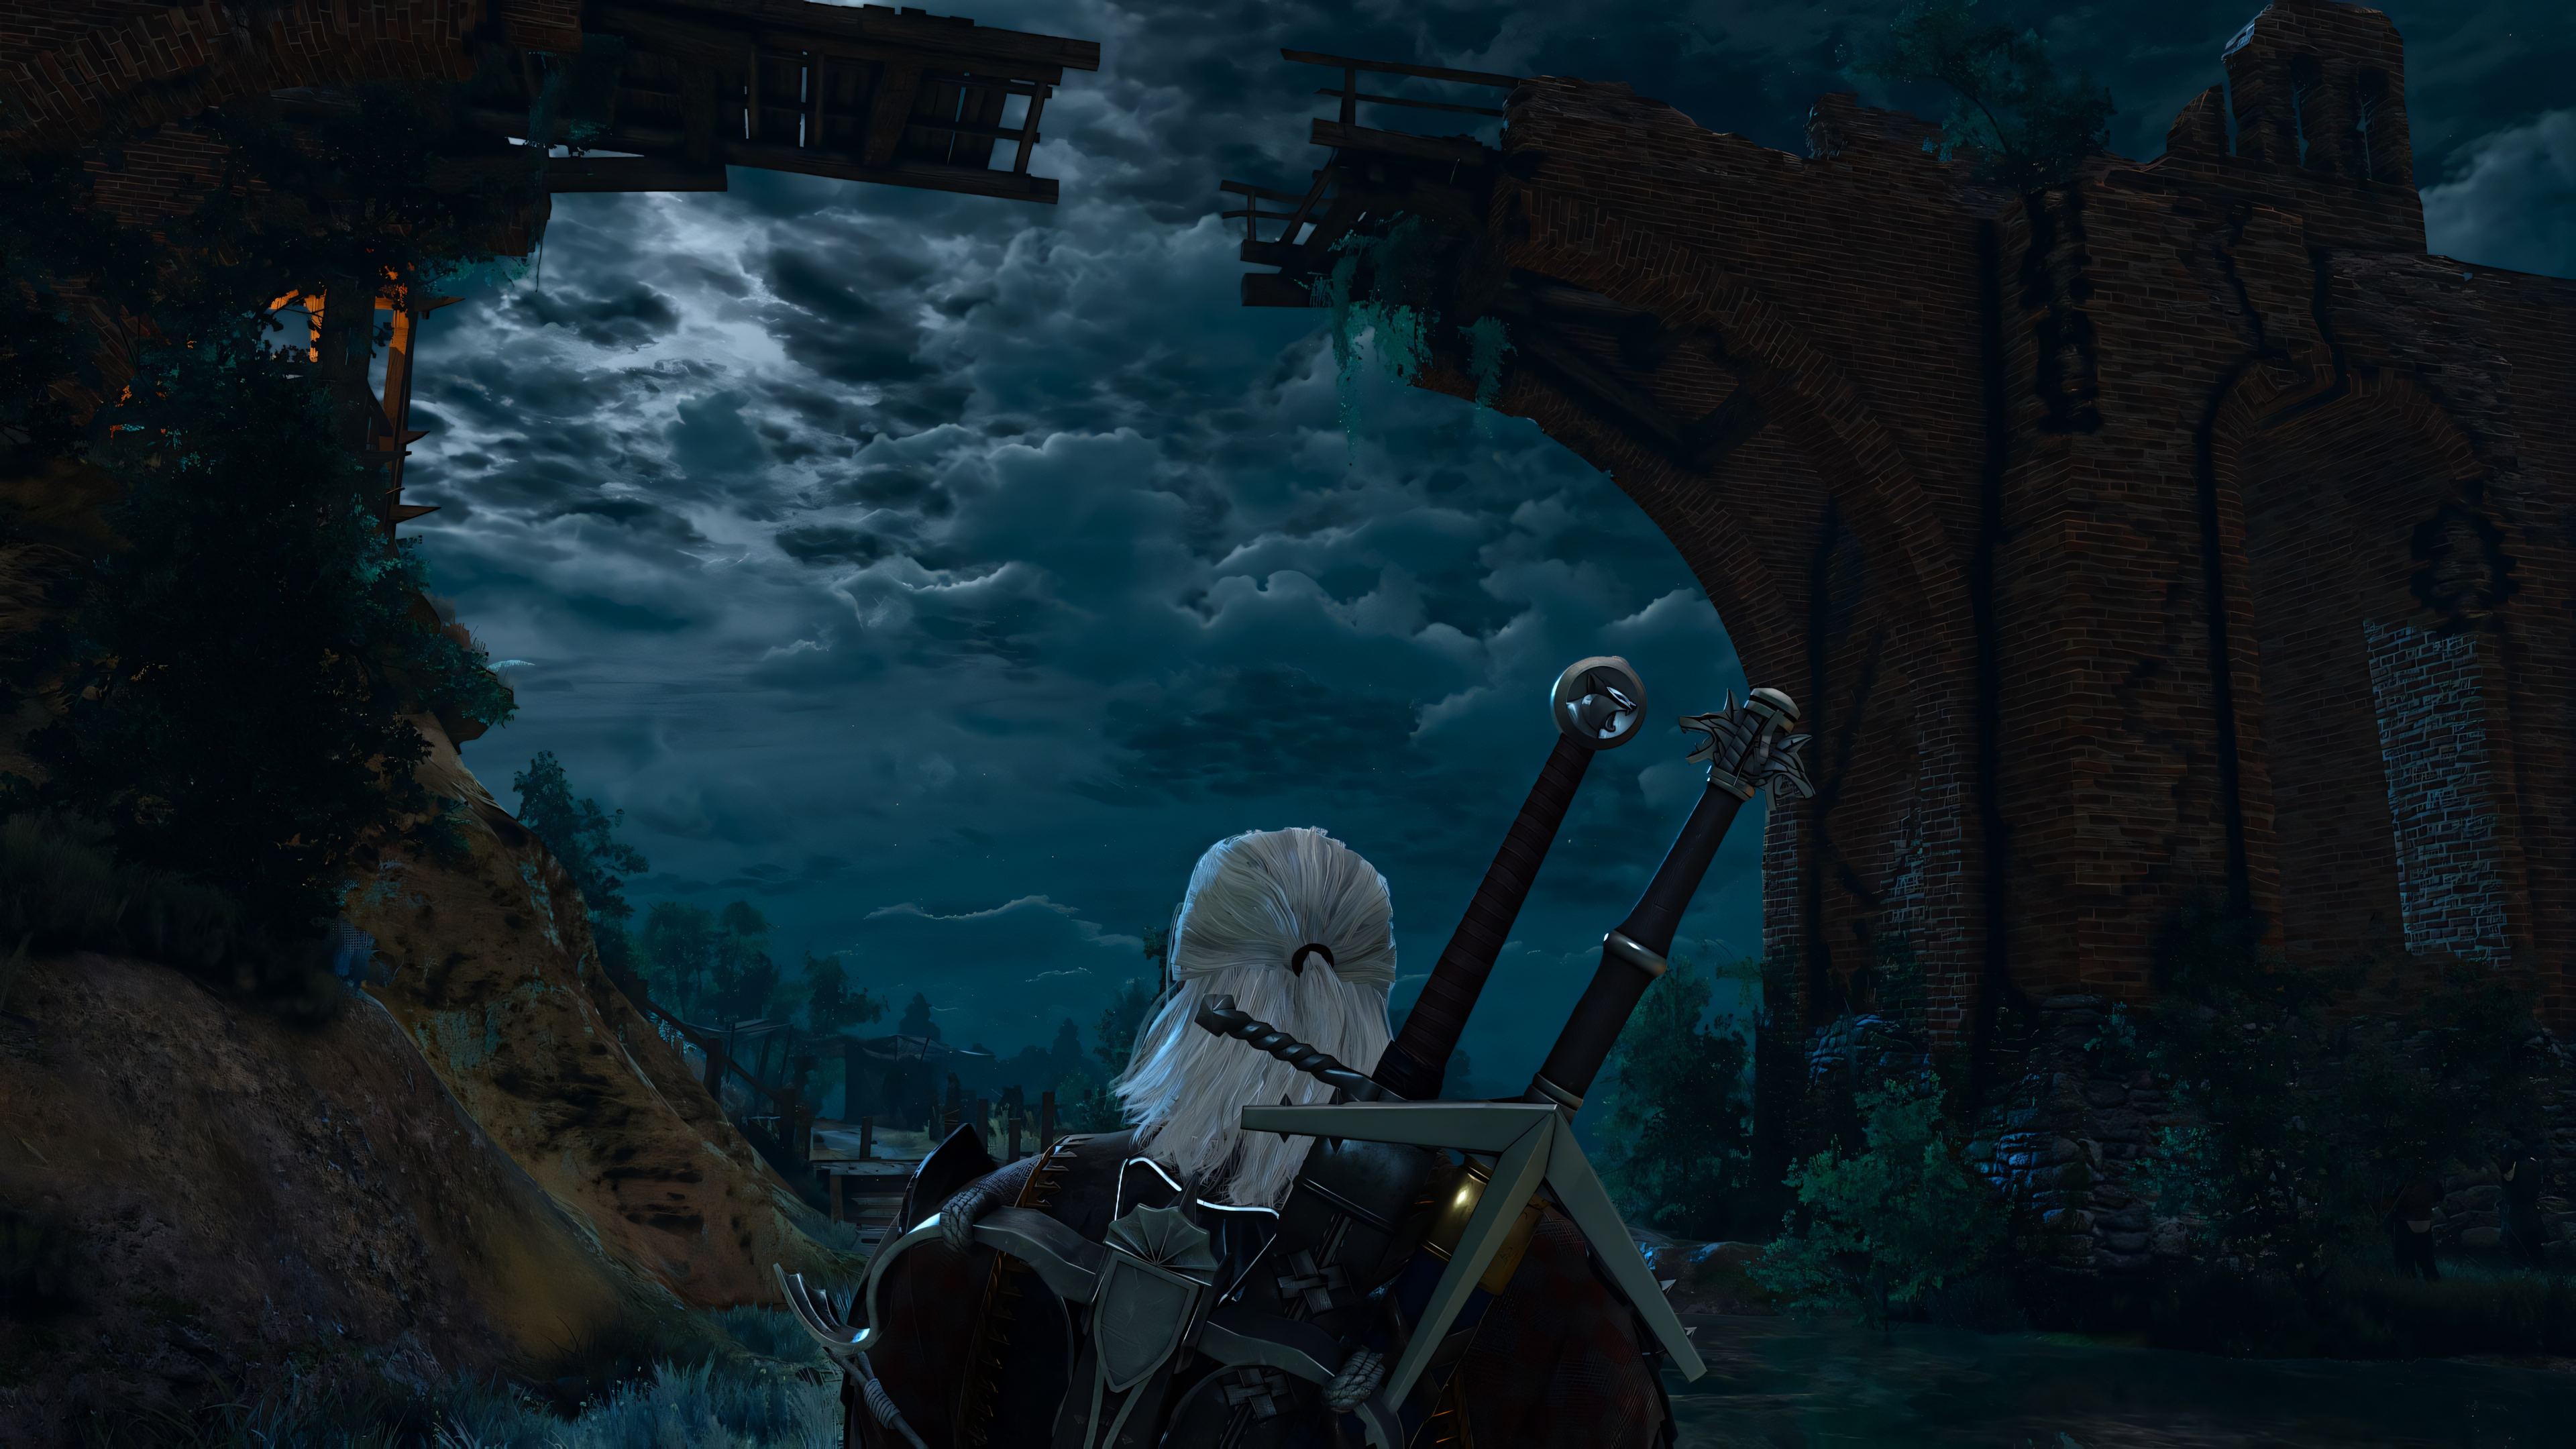 General 3840x2160 Geralt of Rivia The Witcher 3: Wild Hunt – Hearts of Stone The Witcher 3: Wild Hunt The Witcher 3: Wild Hunt - Blood and Wine traveler night sky architecture video game art video games sword white hair overcast